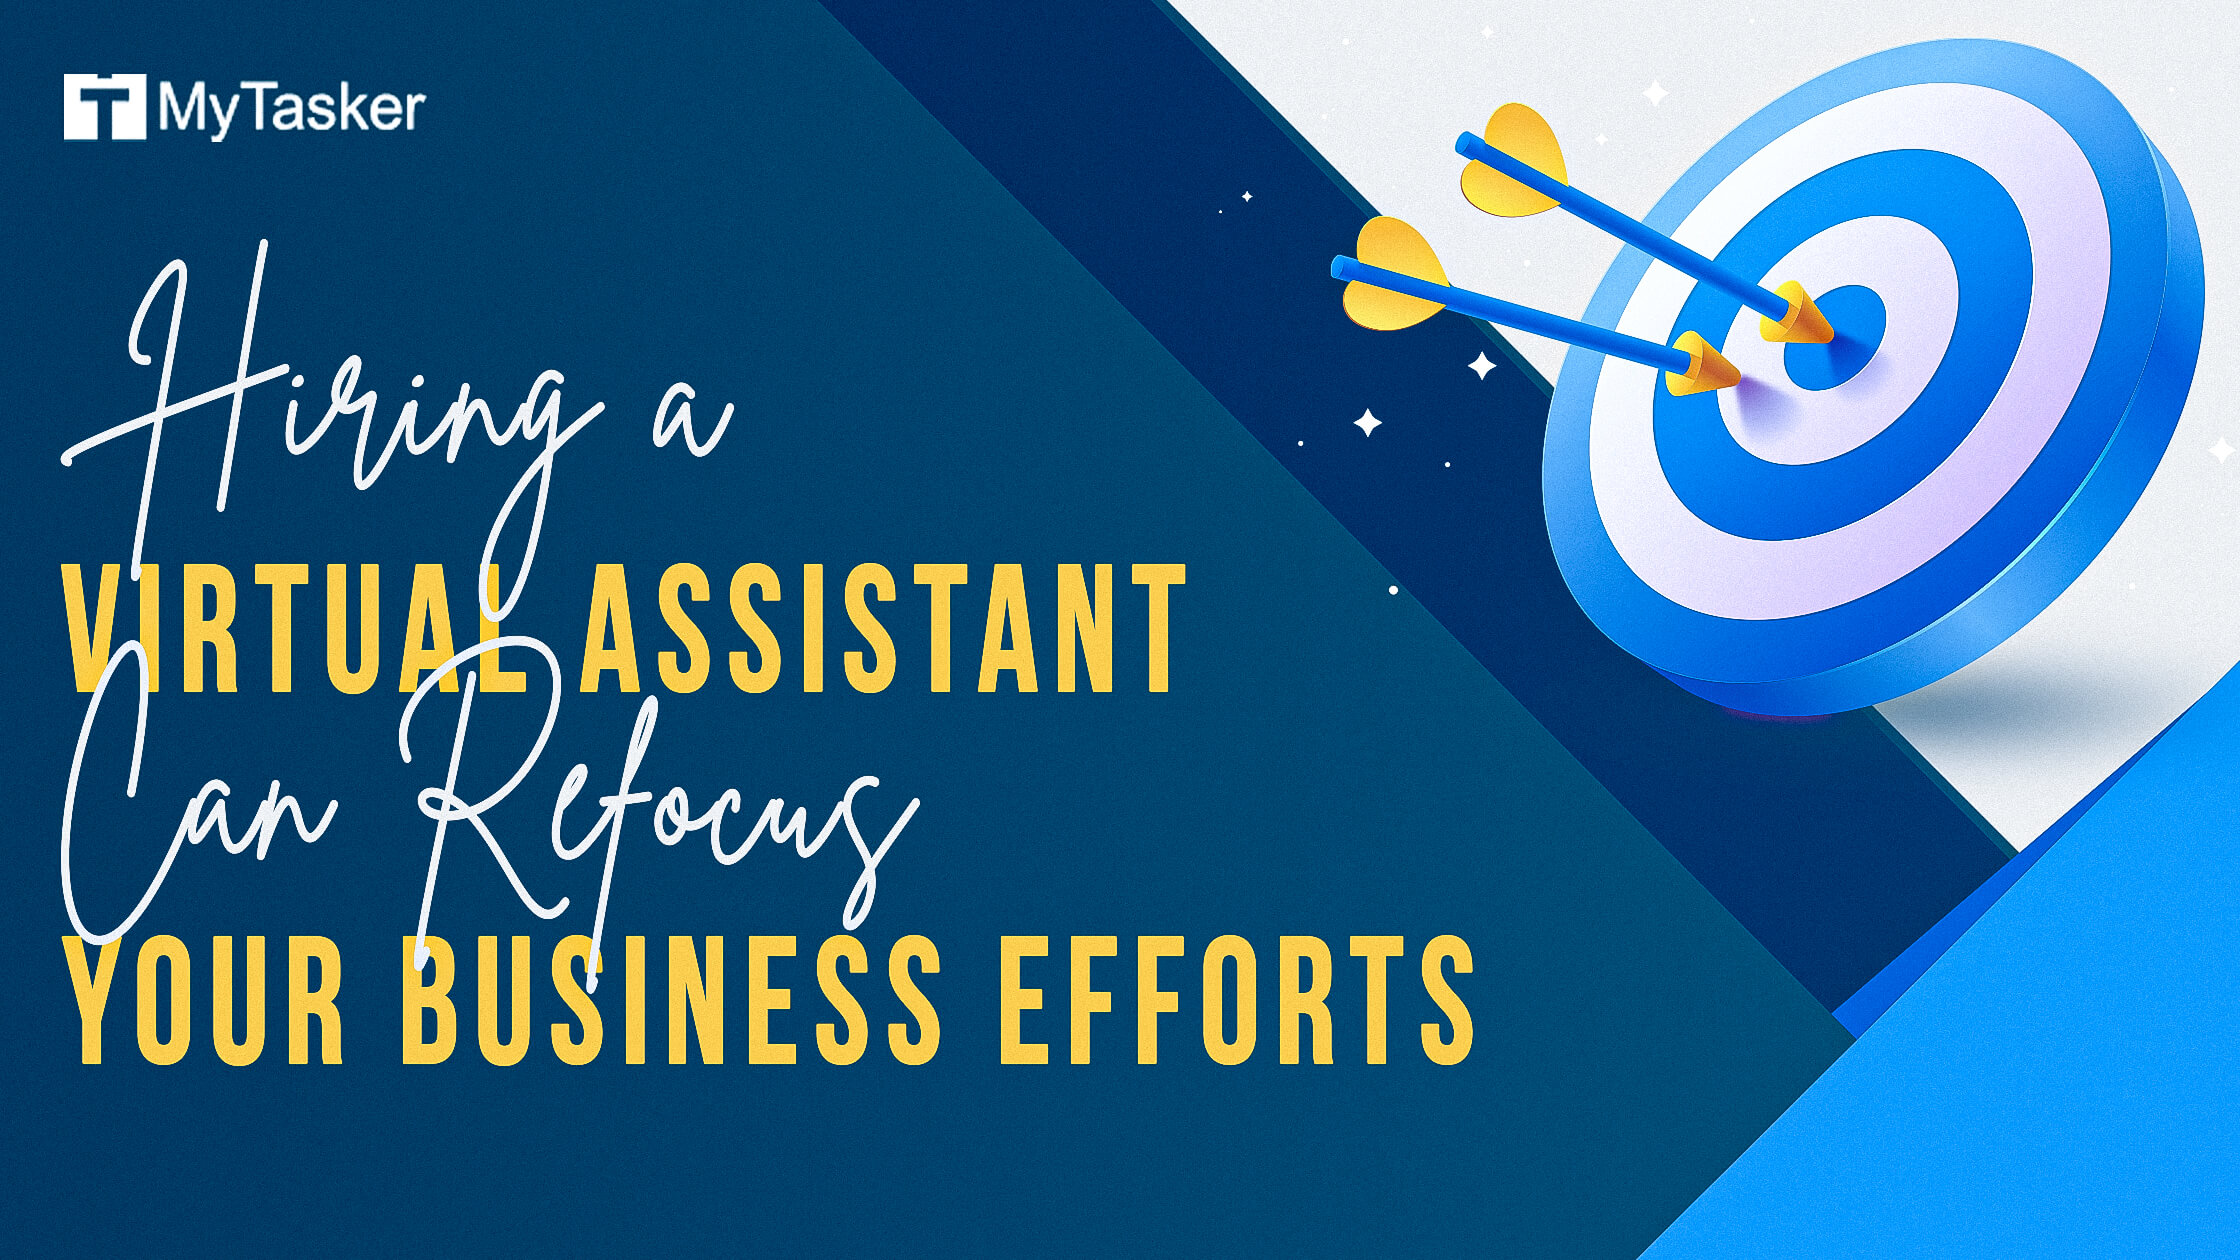 Hiring a Virtual Assistant Can Refocus Your Business Efforts